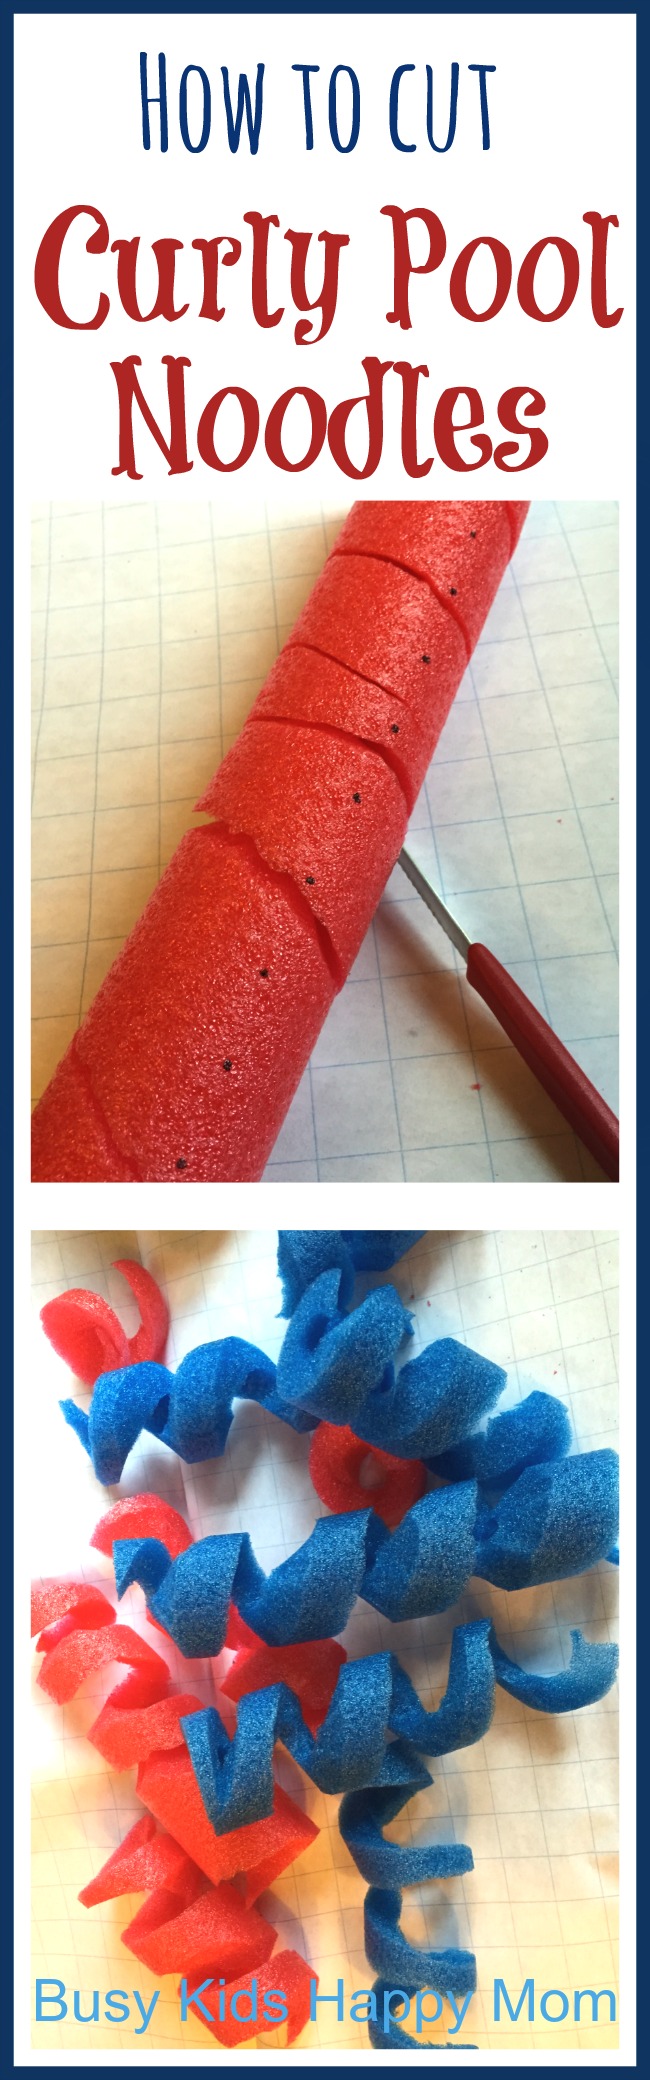 How to cut Curly Pool Noodles